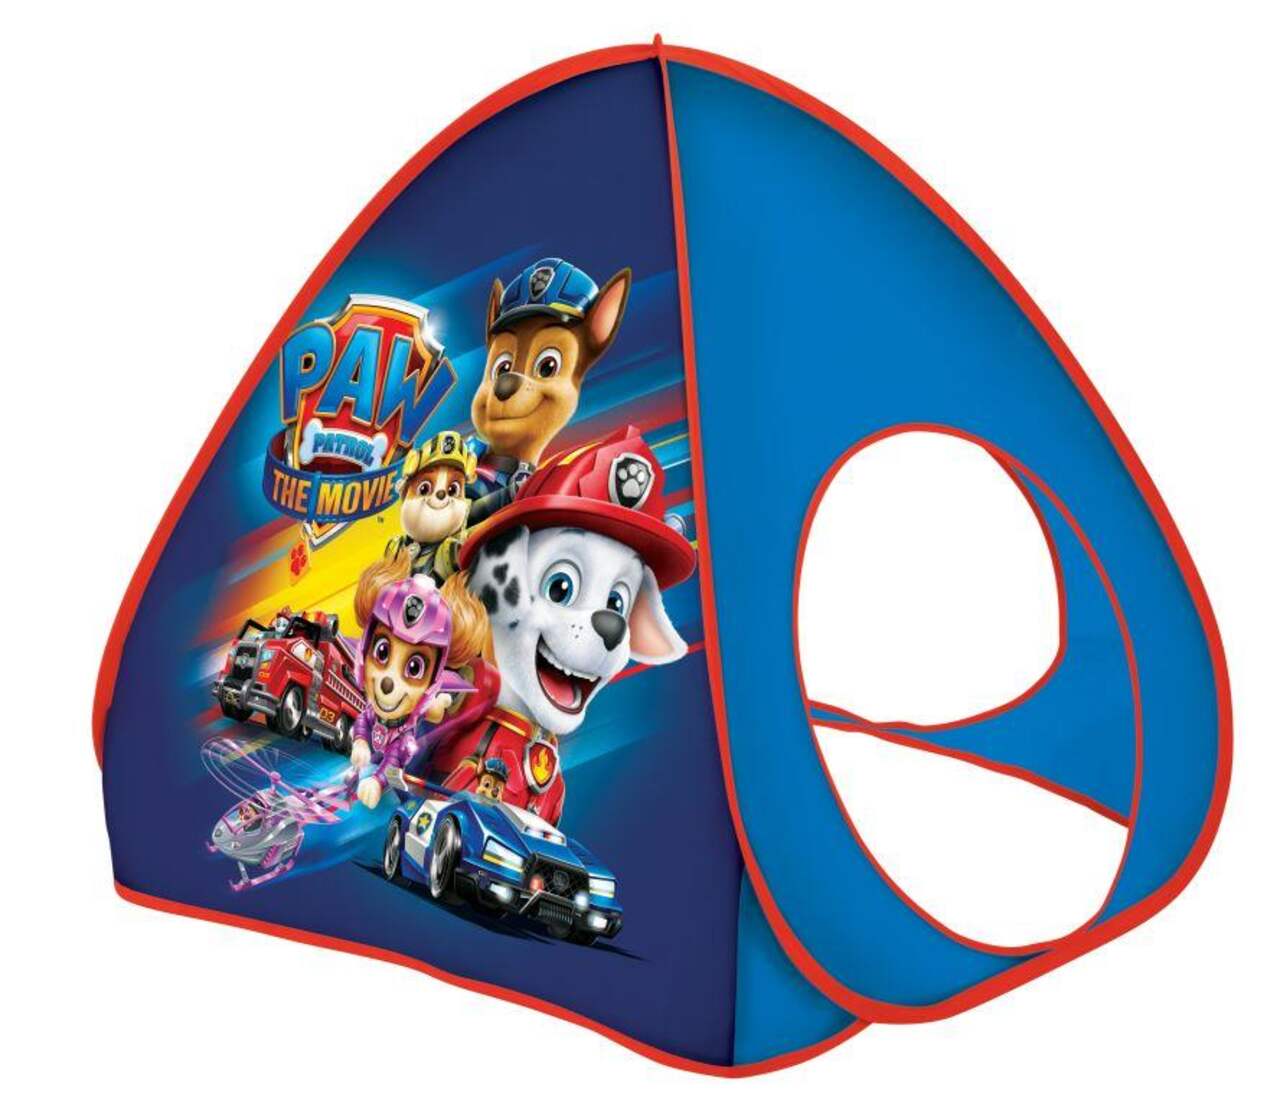 PAW Patrol The Movie Tent with Graphics for Kids, Twist, Pop, Play, Easy to  Store, Blue, Age 3+